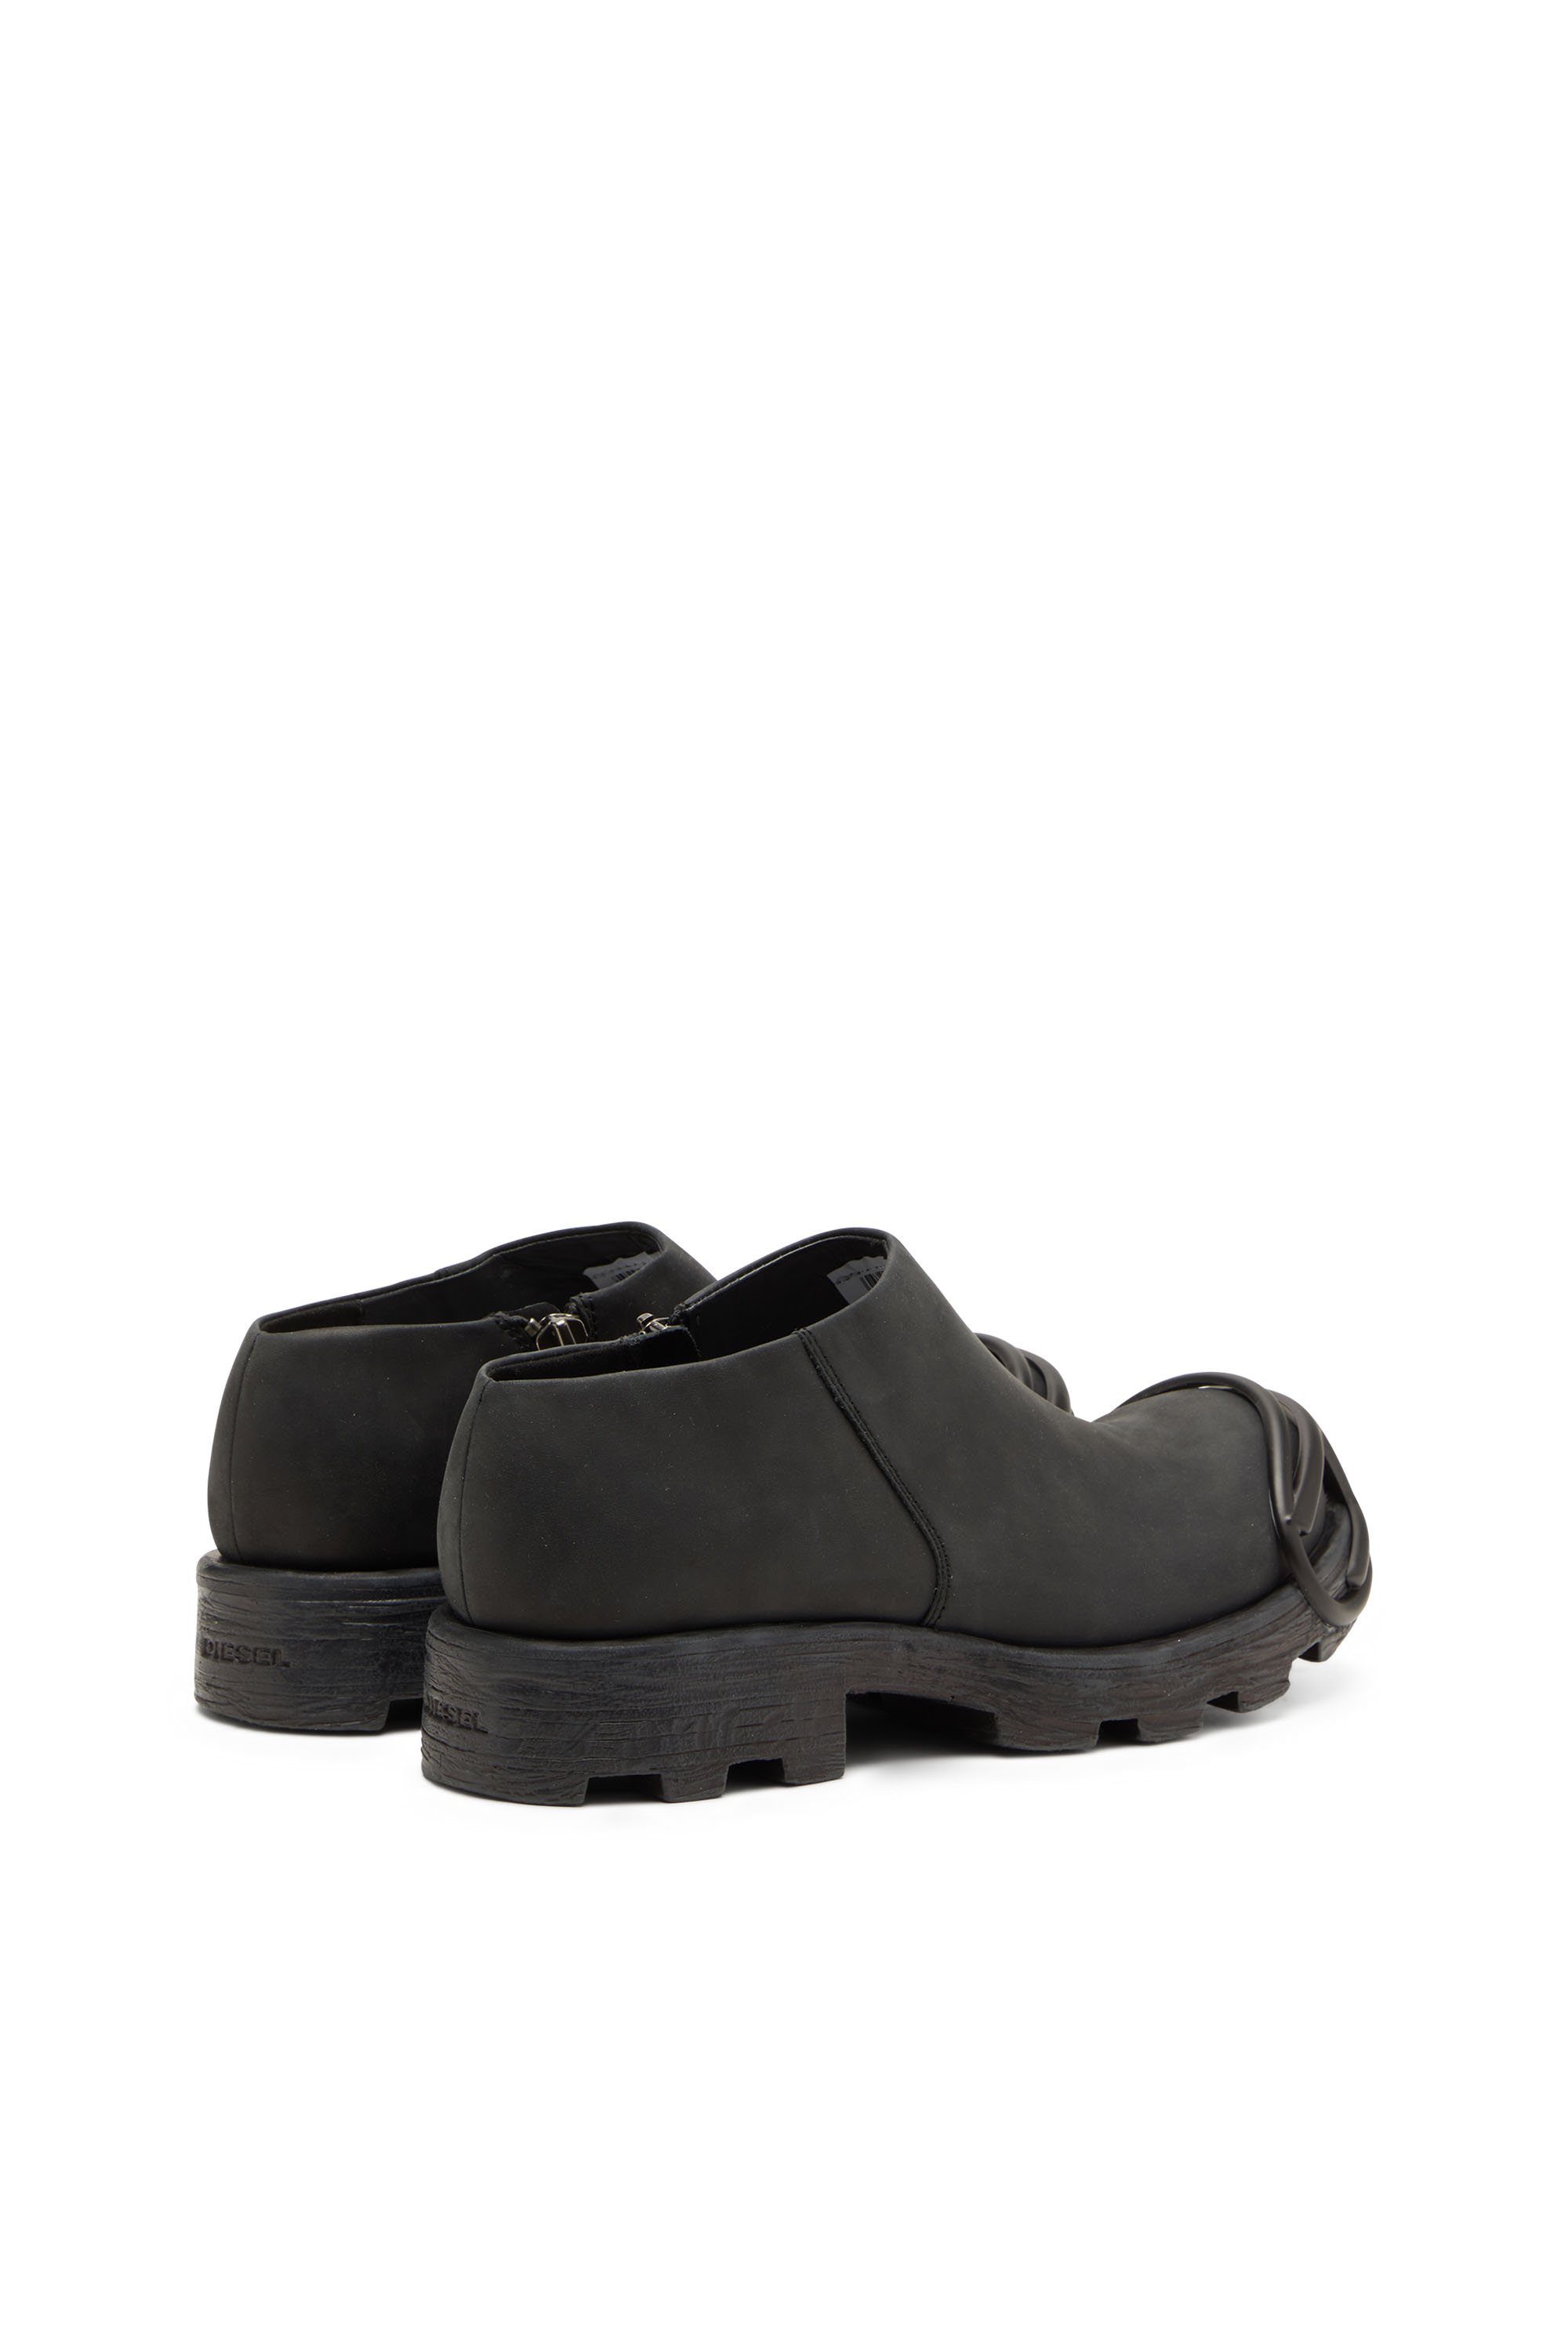 Diesel - D-HAMMER AB D, Male D-Hammer Ab D Boots - Low-cut boots with oval D toe guard in Black - Image 4